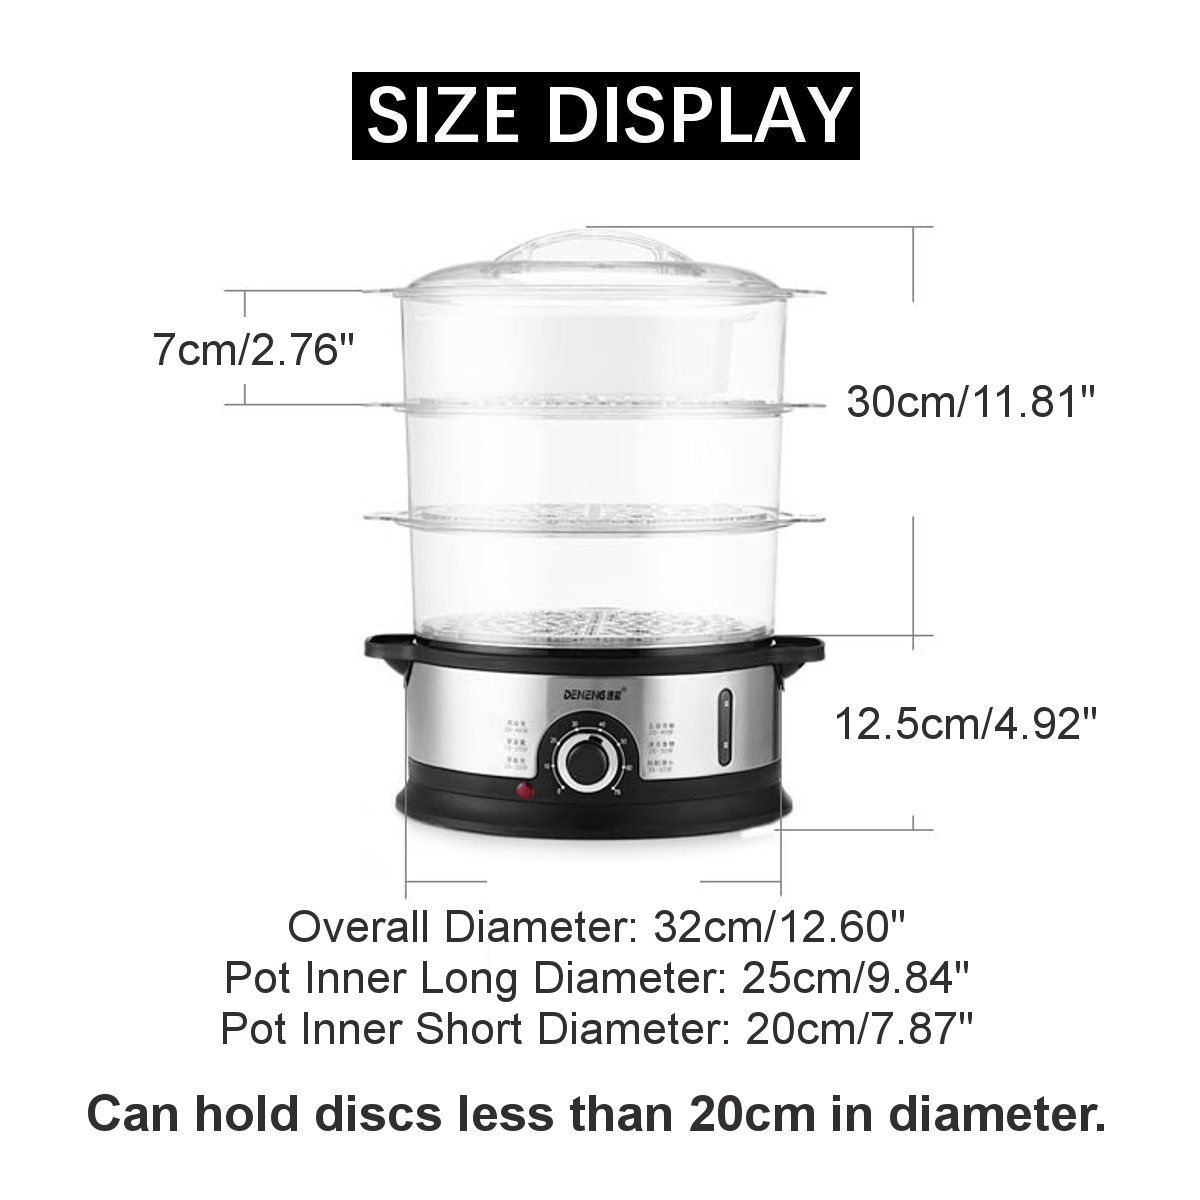 220V-800W-3-Tier-Electric-Food-Steamer-Timing-Home-Kitchen-Fish-Cooking-Machine-1587809